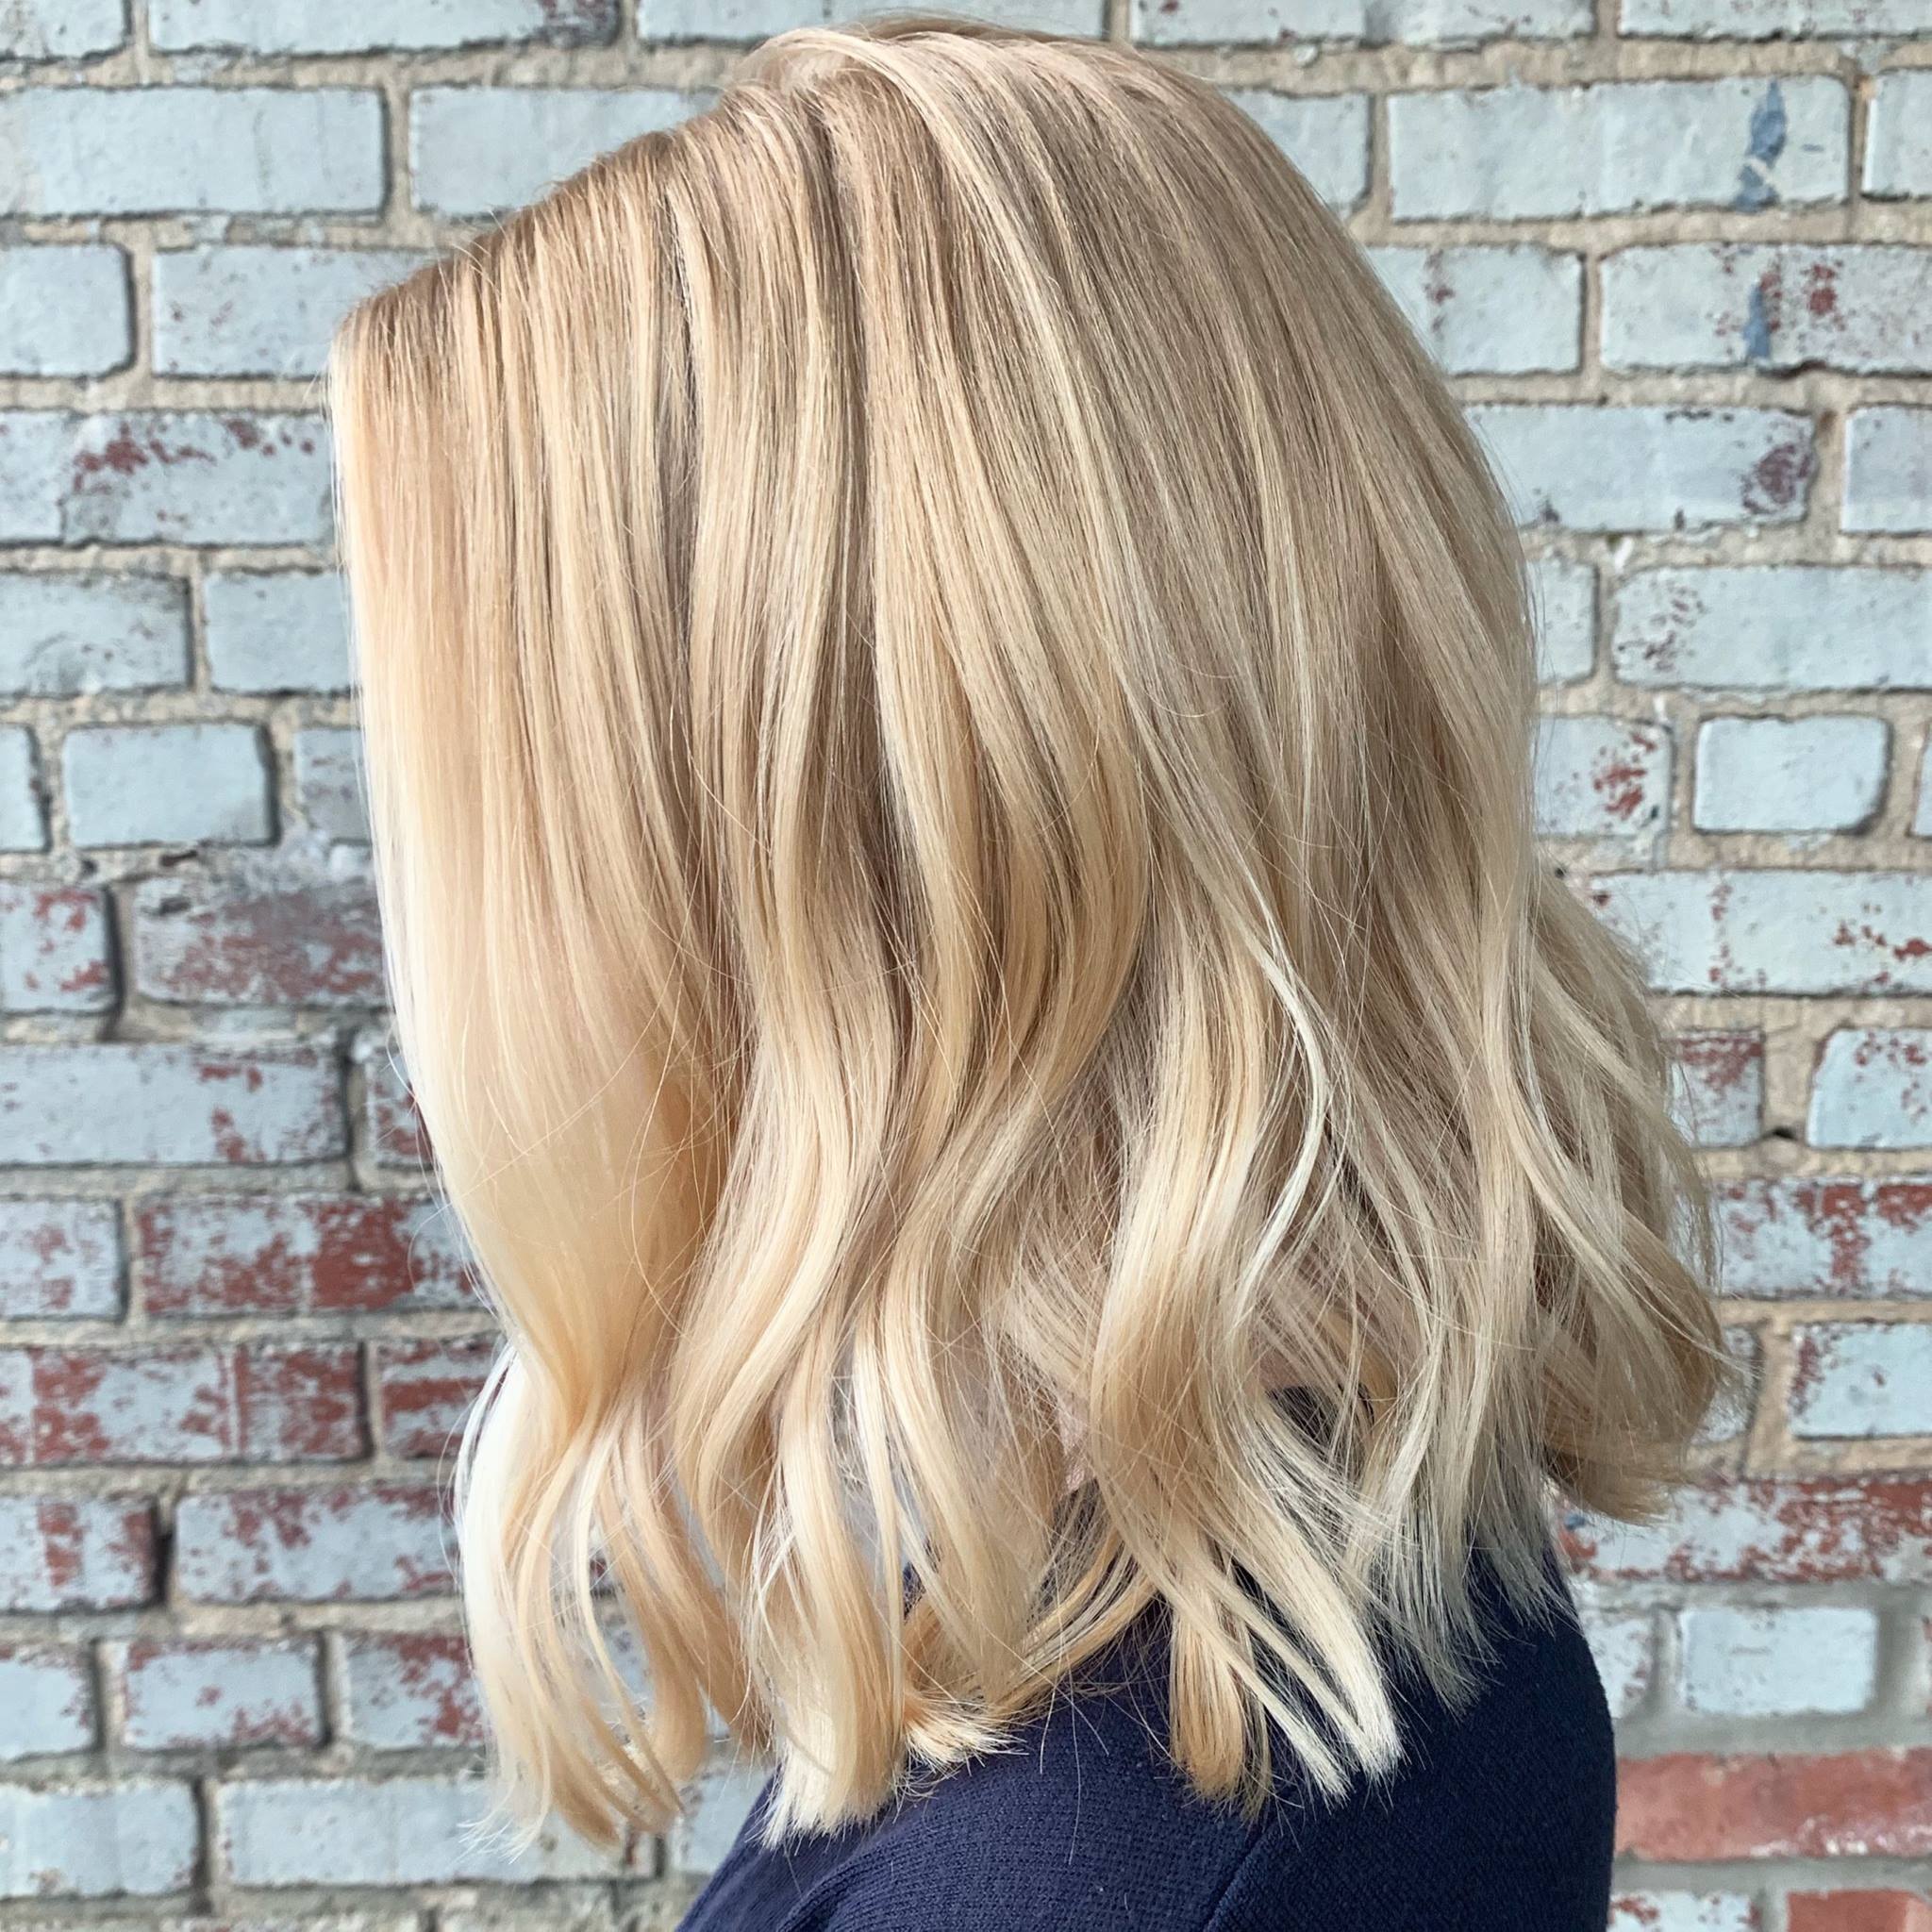 a lob or long bob is a form of haircut and a variant of bob cut